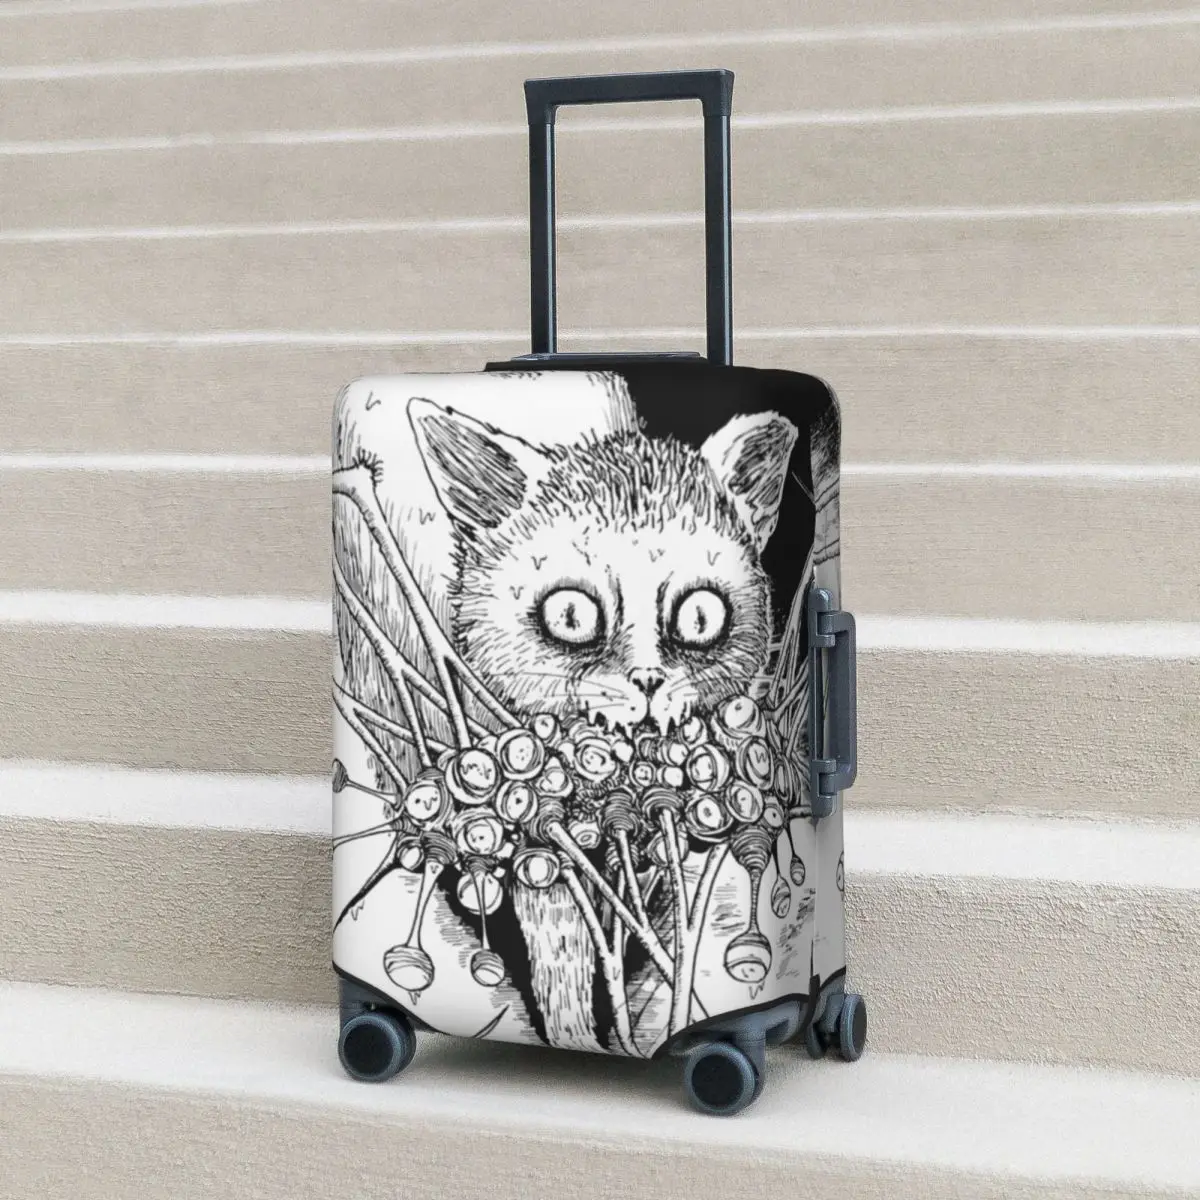 

Soichis Beloved Pet Junji Ito Suitcase Cover Tomie Cruise Trip Protection Flight Useful Luggage Accesories